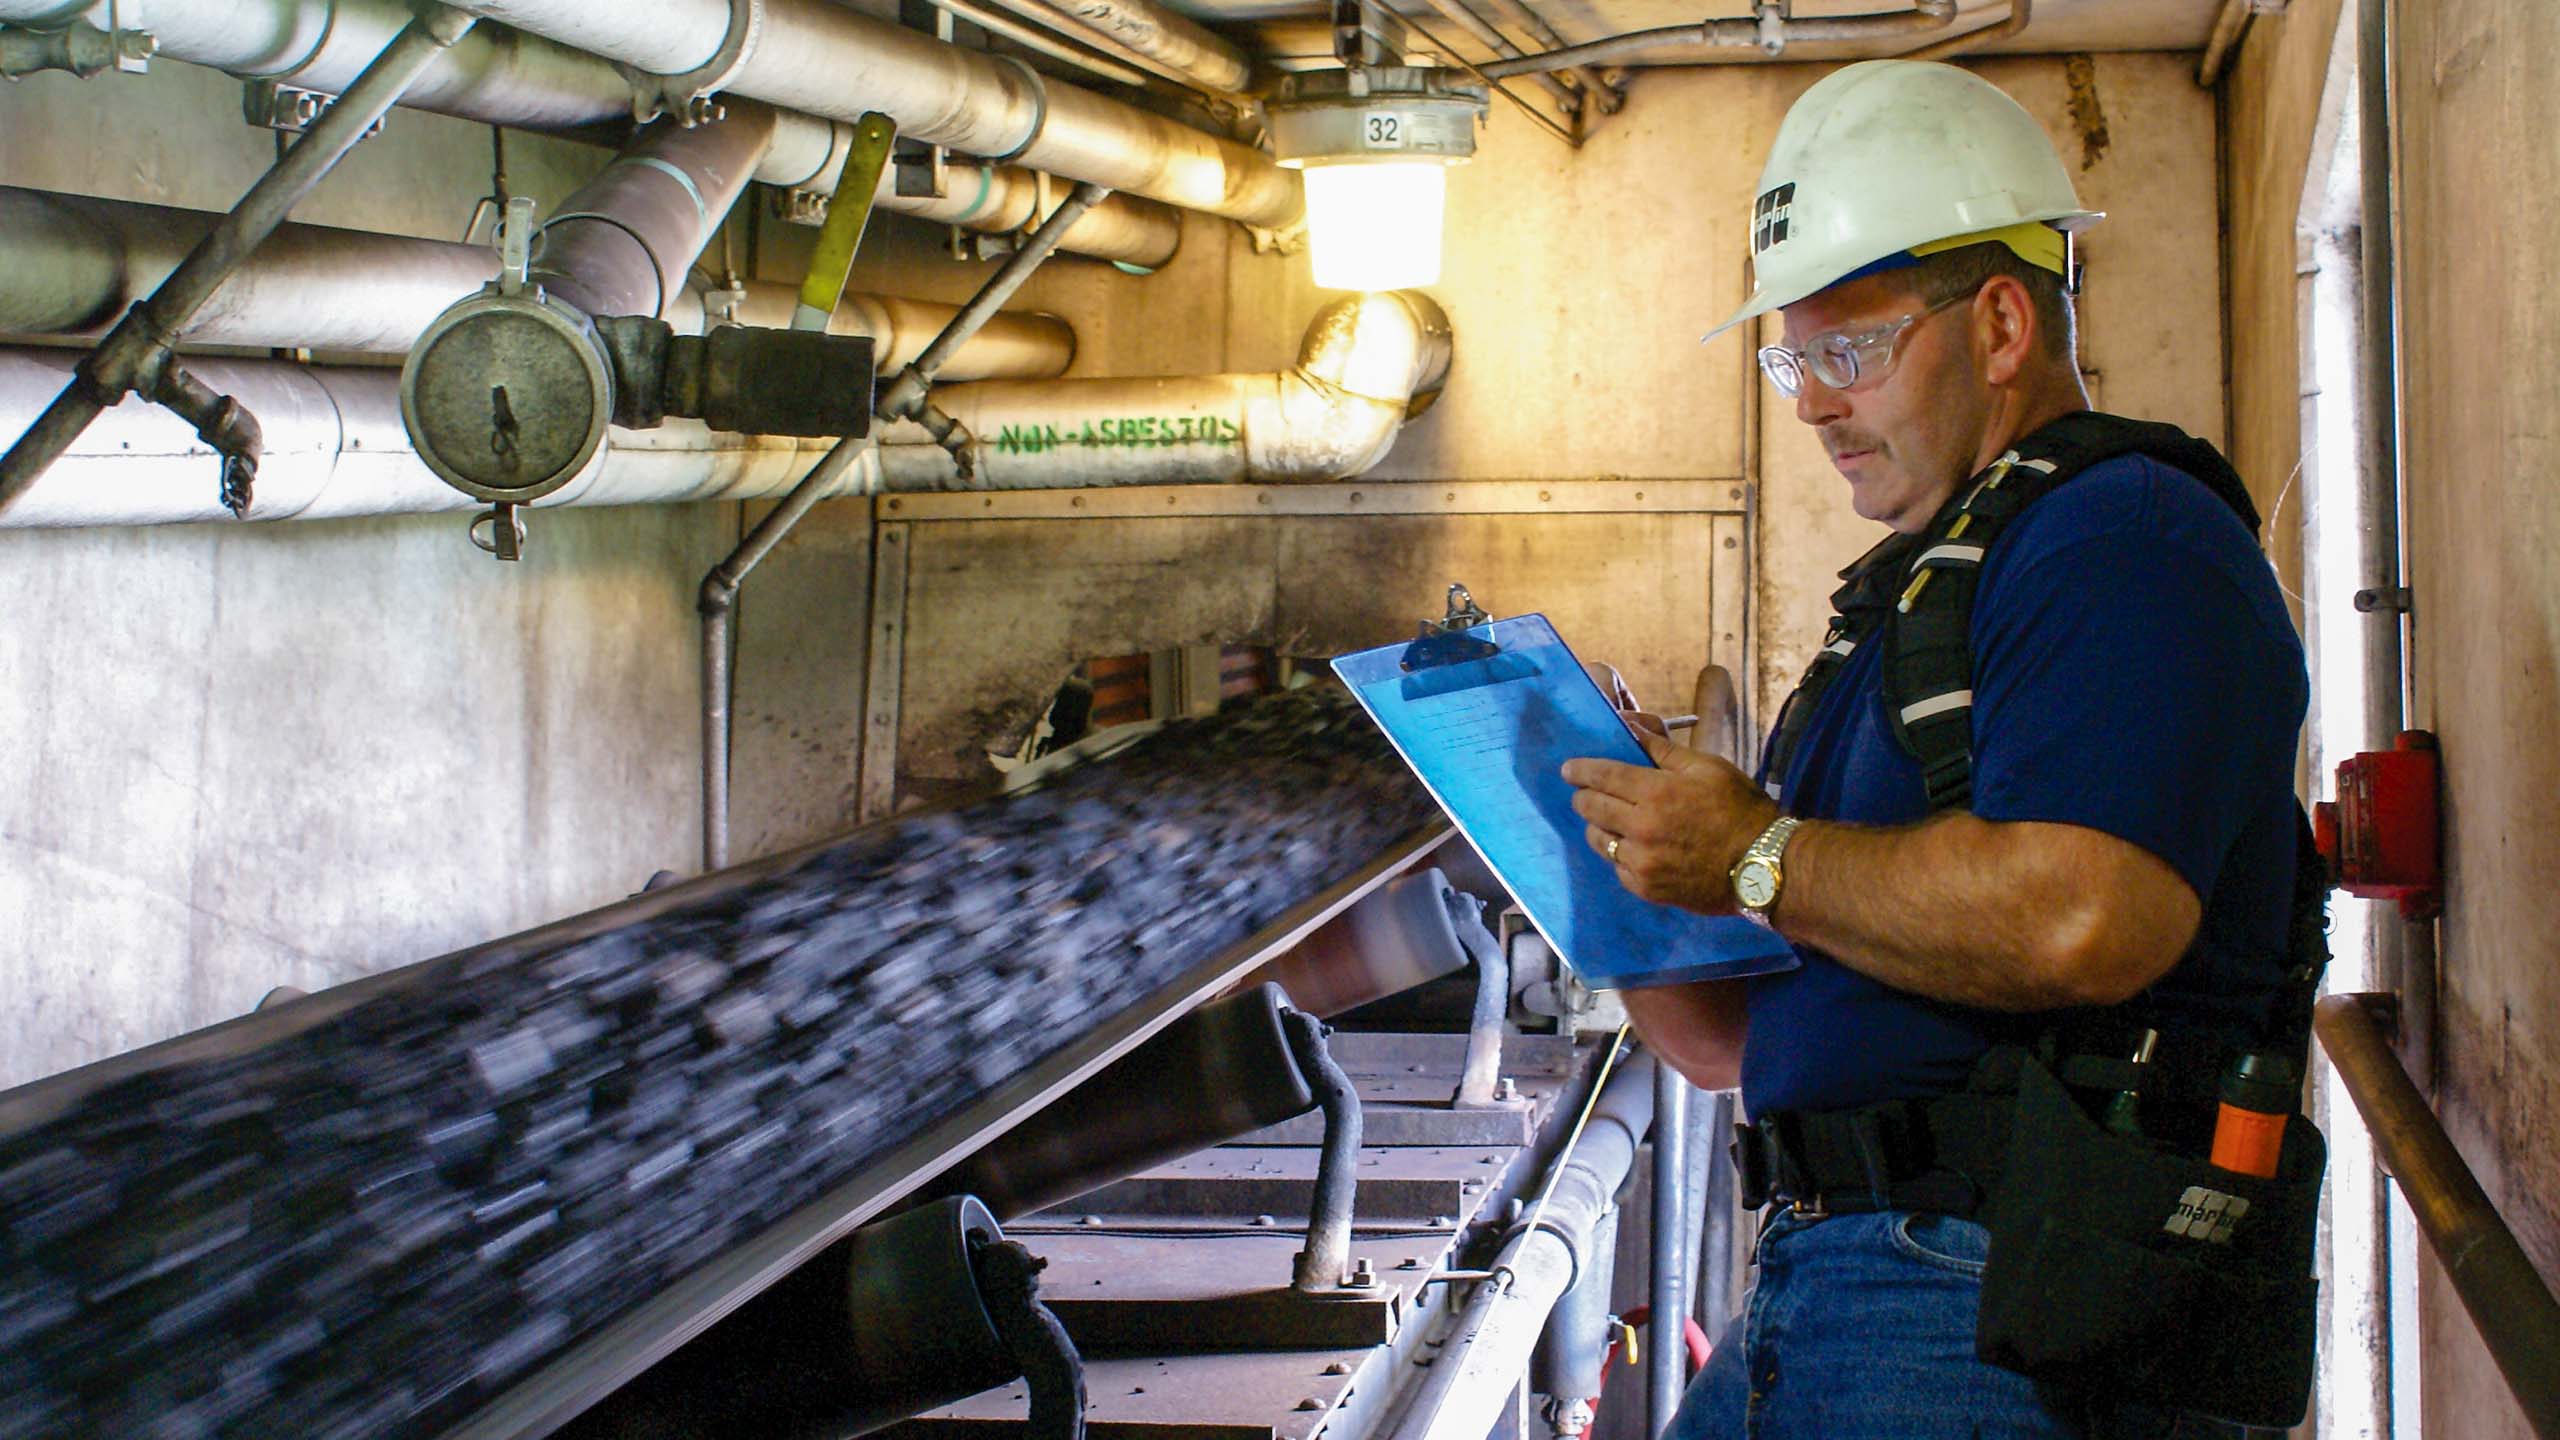 conveyor inspection and preventative maintenance are crucial